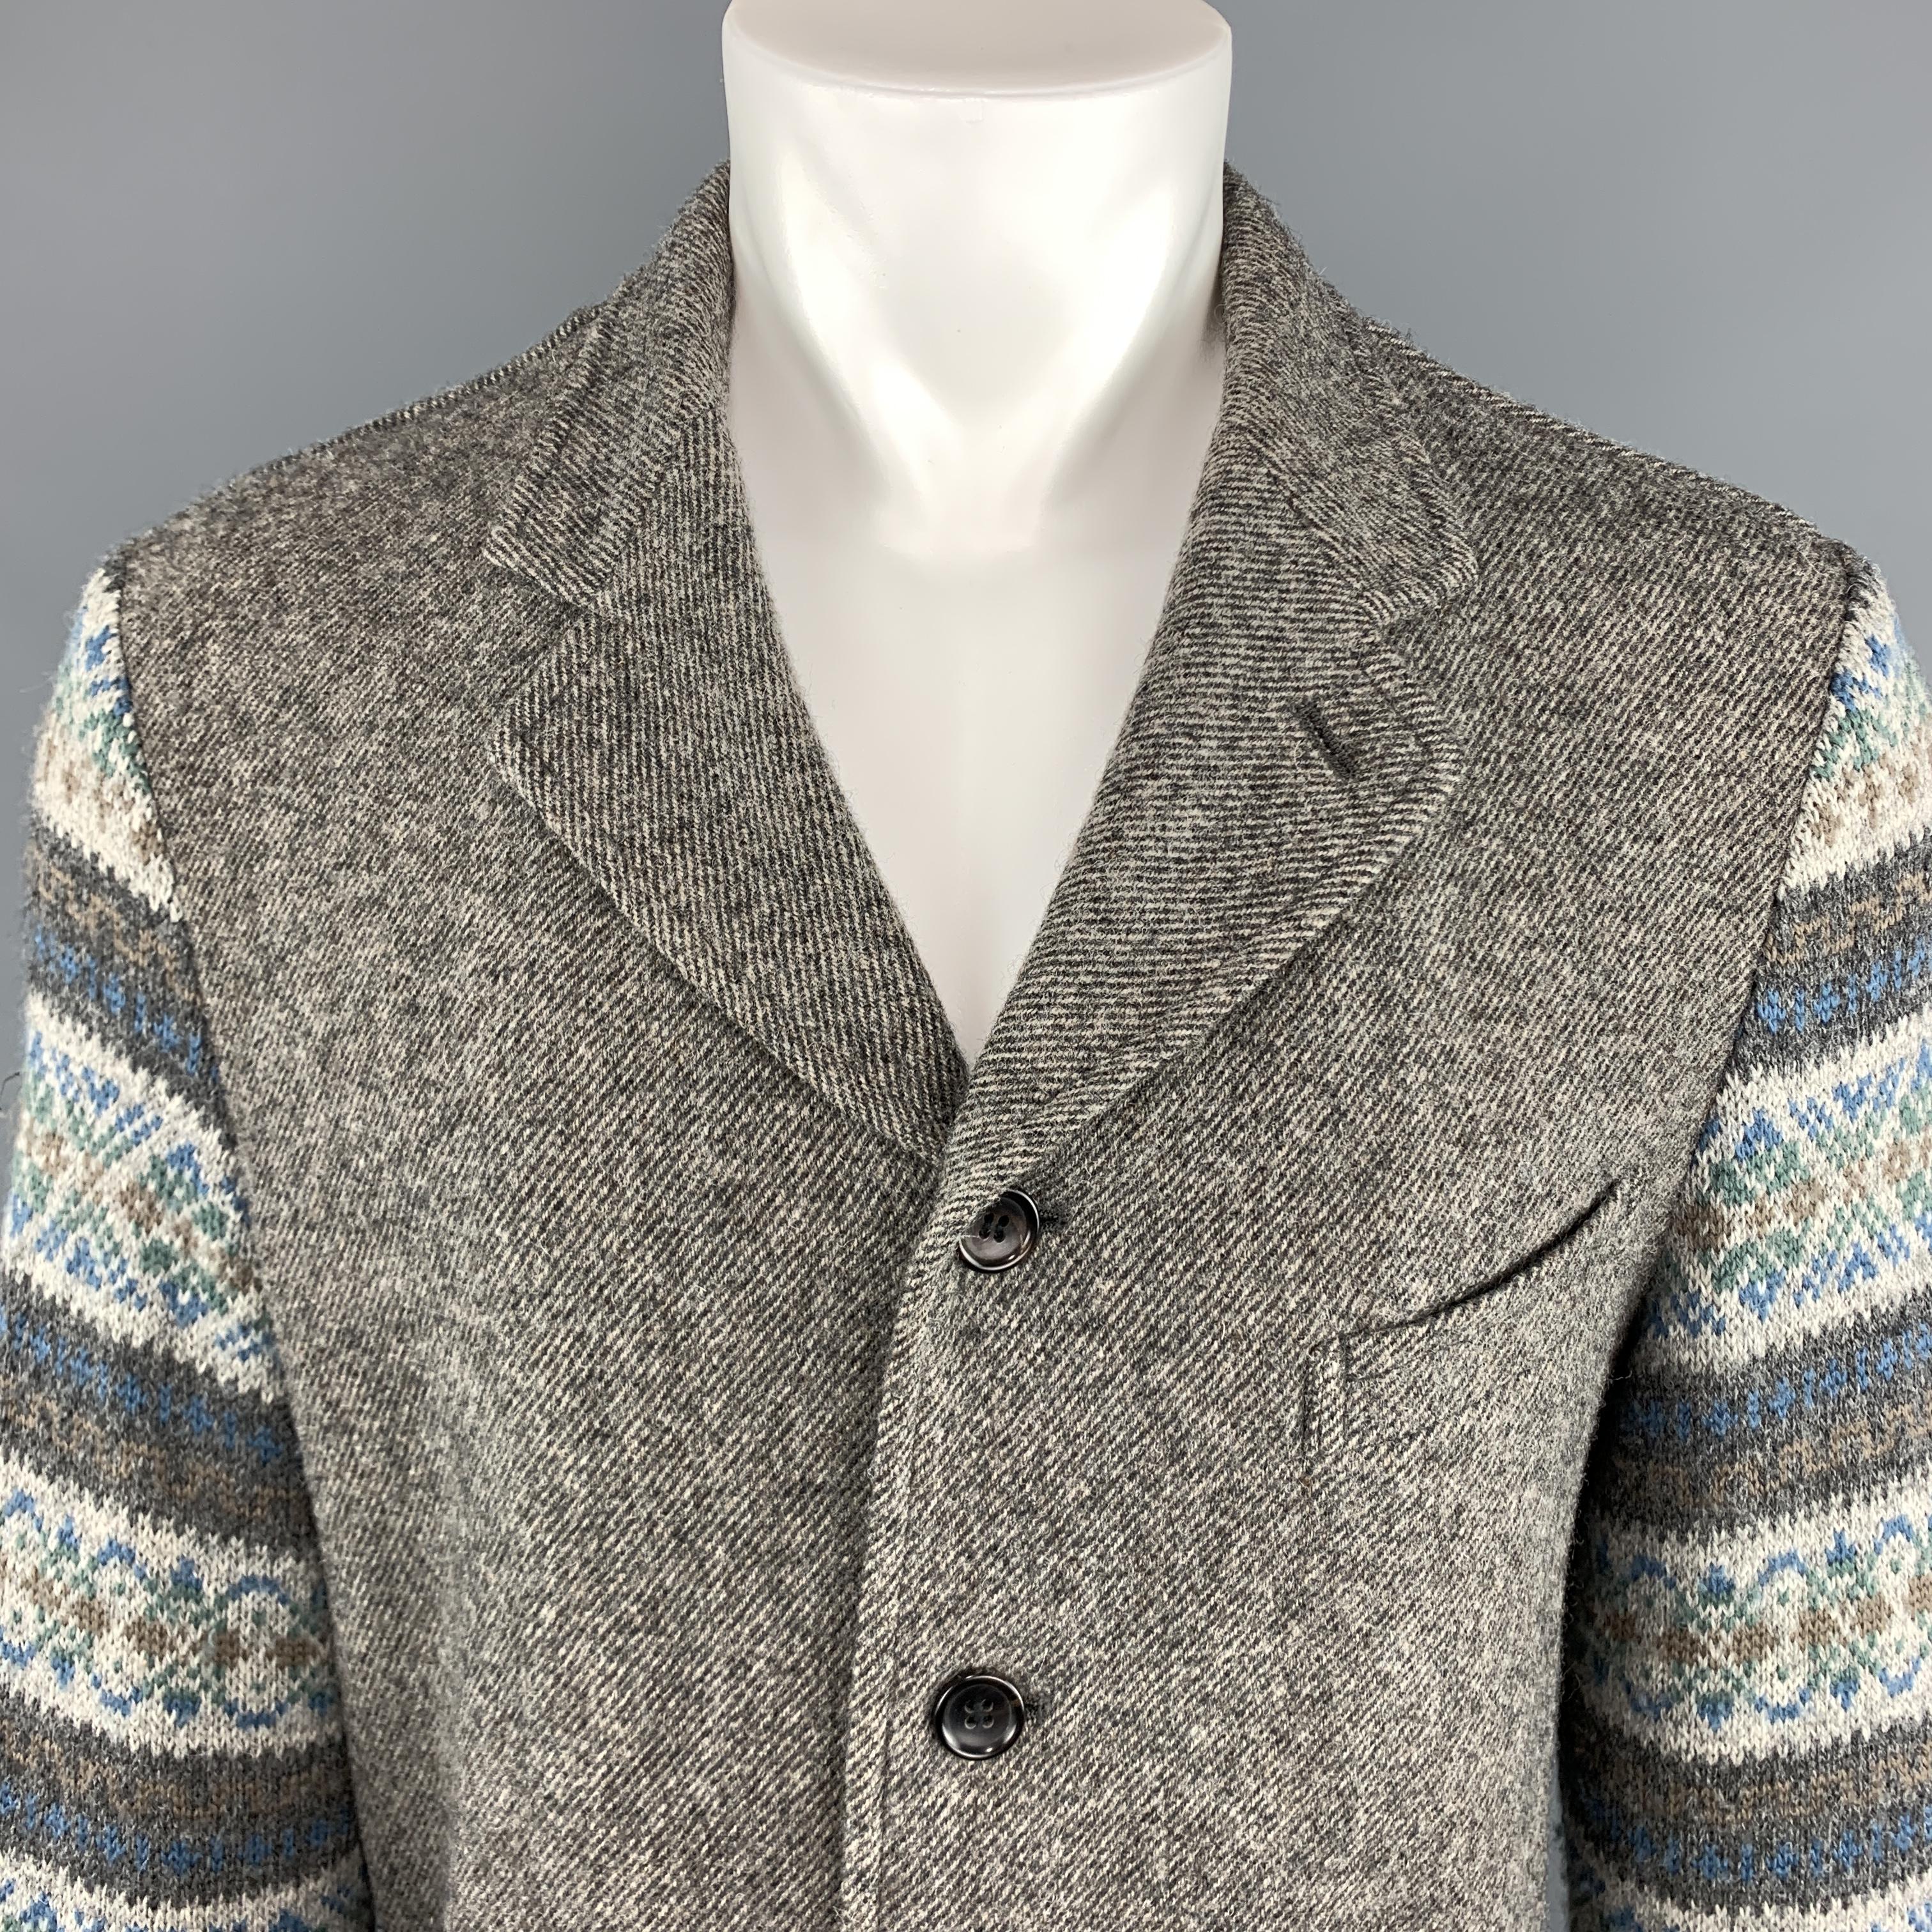 COMME des GARCONS HOMME PLUS sport jacket comes in heather taupe gray wool knit twill with a single breasted four button front, notch lapel, patch pockets, and blue and gray fairisle knit sleeves. Made in Japan.
 
Excellent Pre-Owned